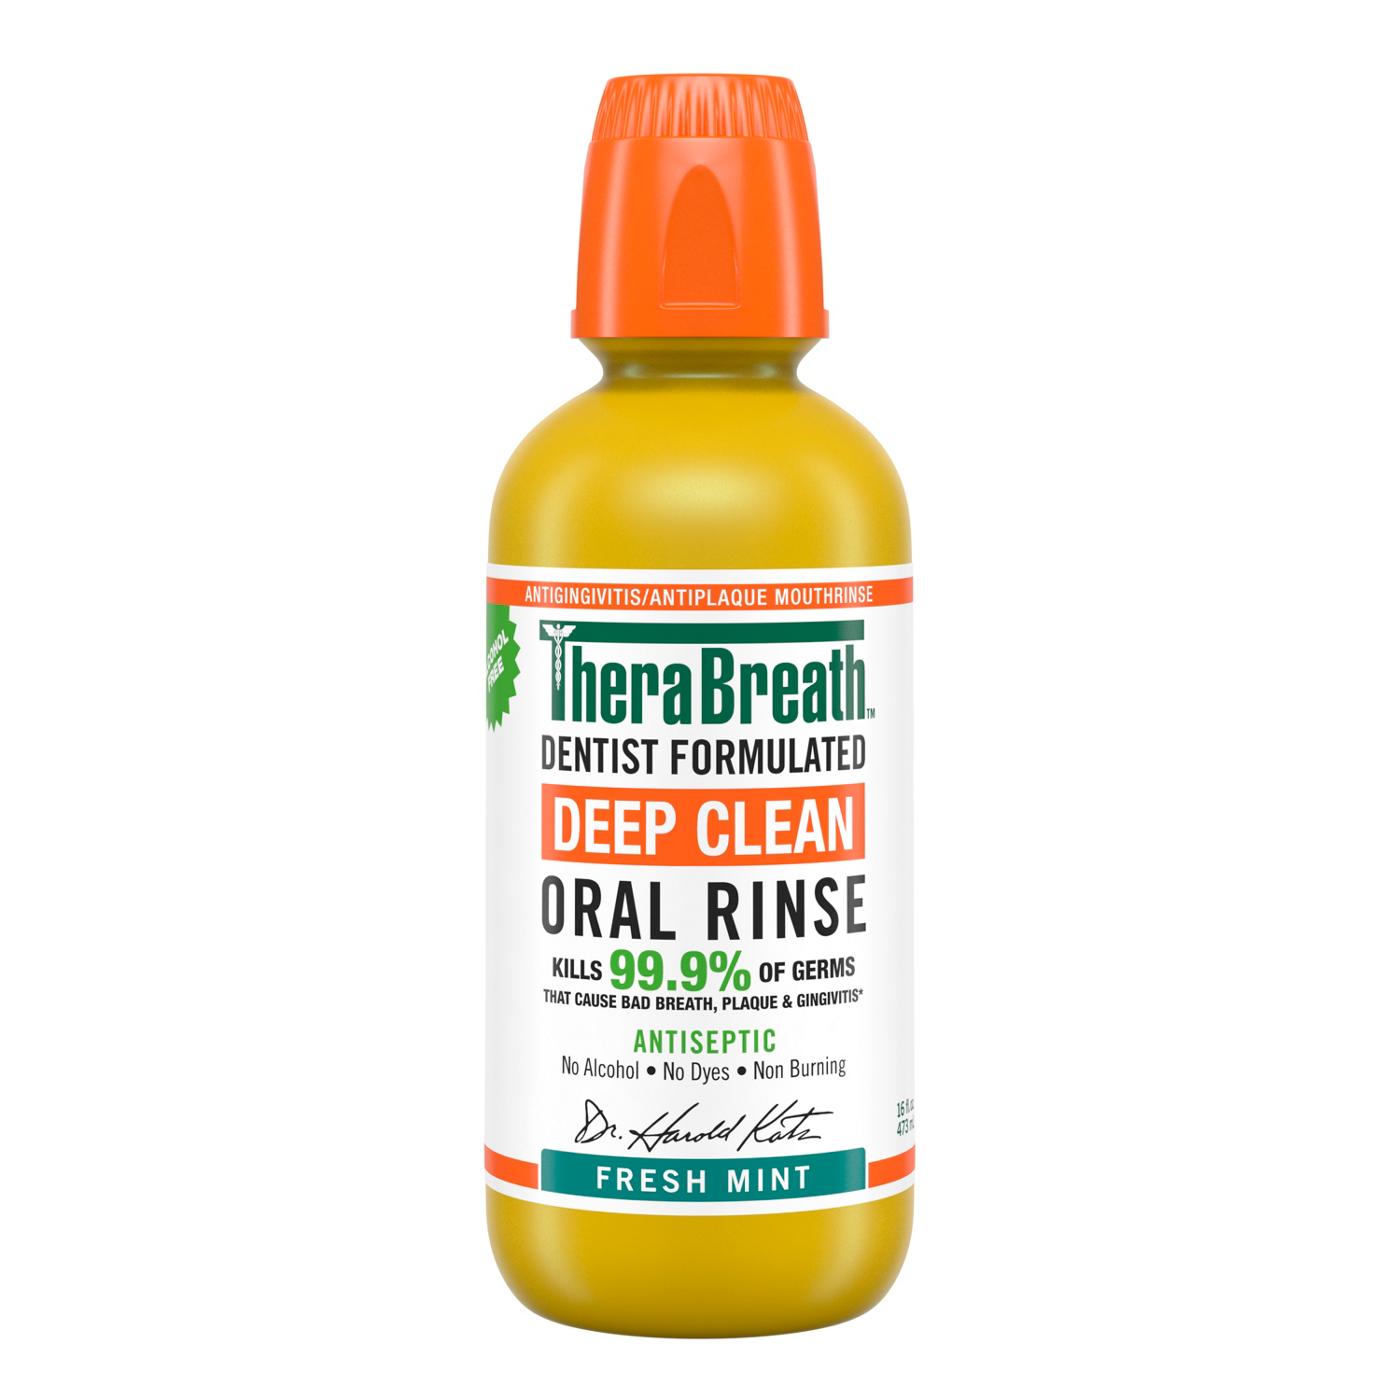 Therabreath Deep Clean Oral Rinse - Fresh Mint; image 1 of 2